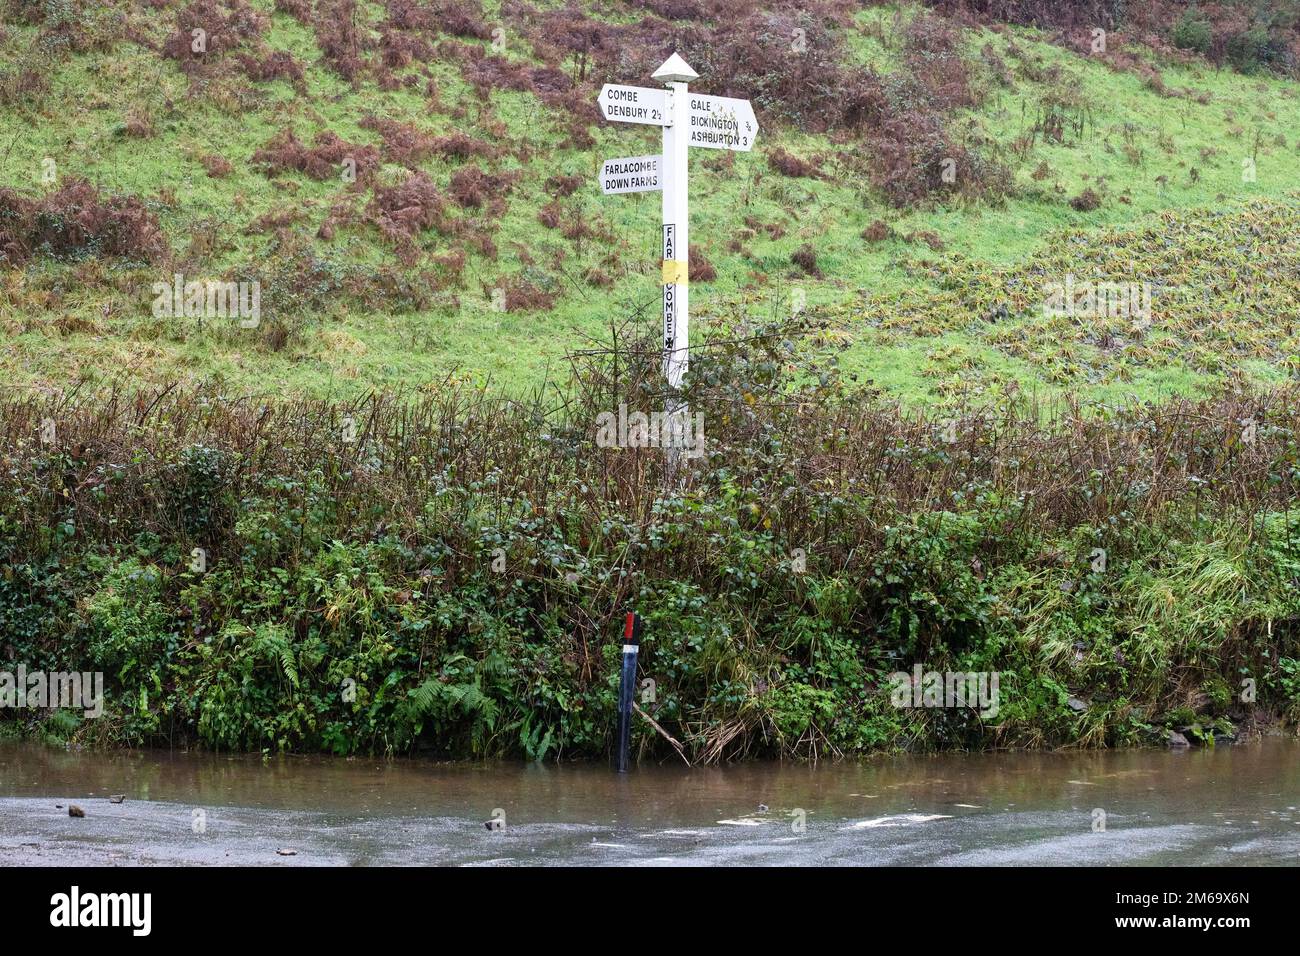 Farlacombe, Devon, UK. 03 Jan 2023, High winds and heavy rain cause flooding and potholes on rural roads in Devon. Credit: Will Tudor/Alamy Live News Stock Photo